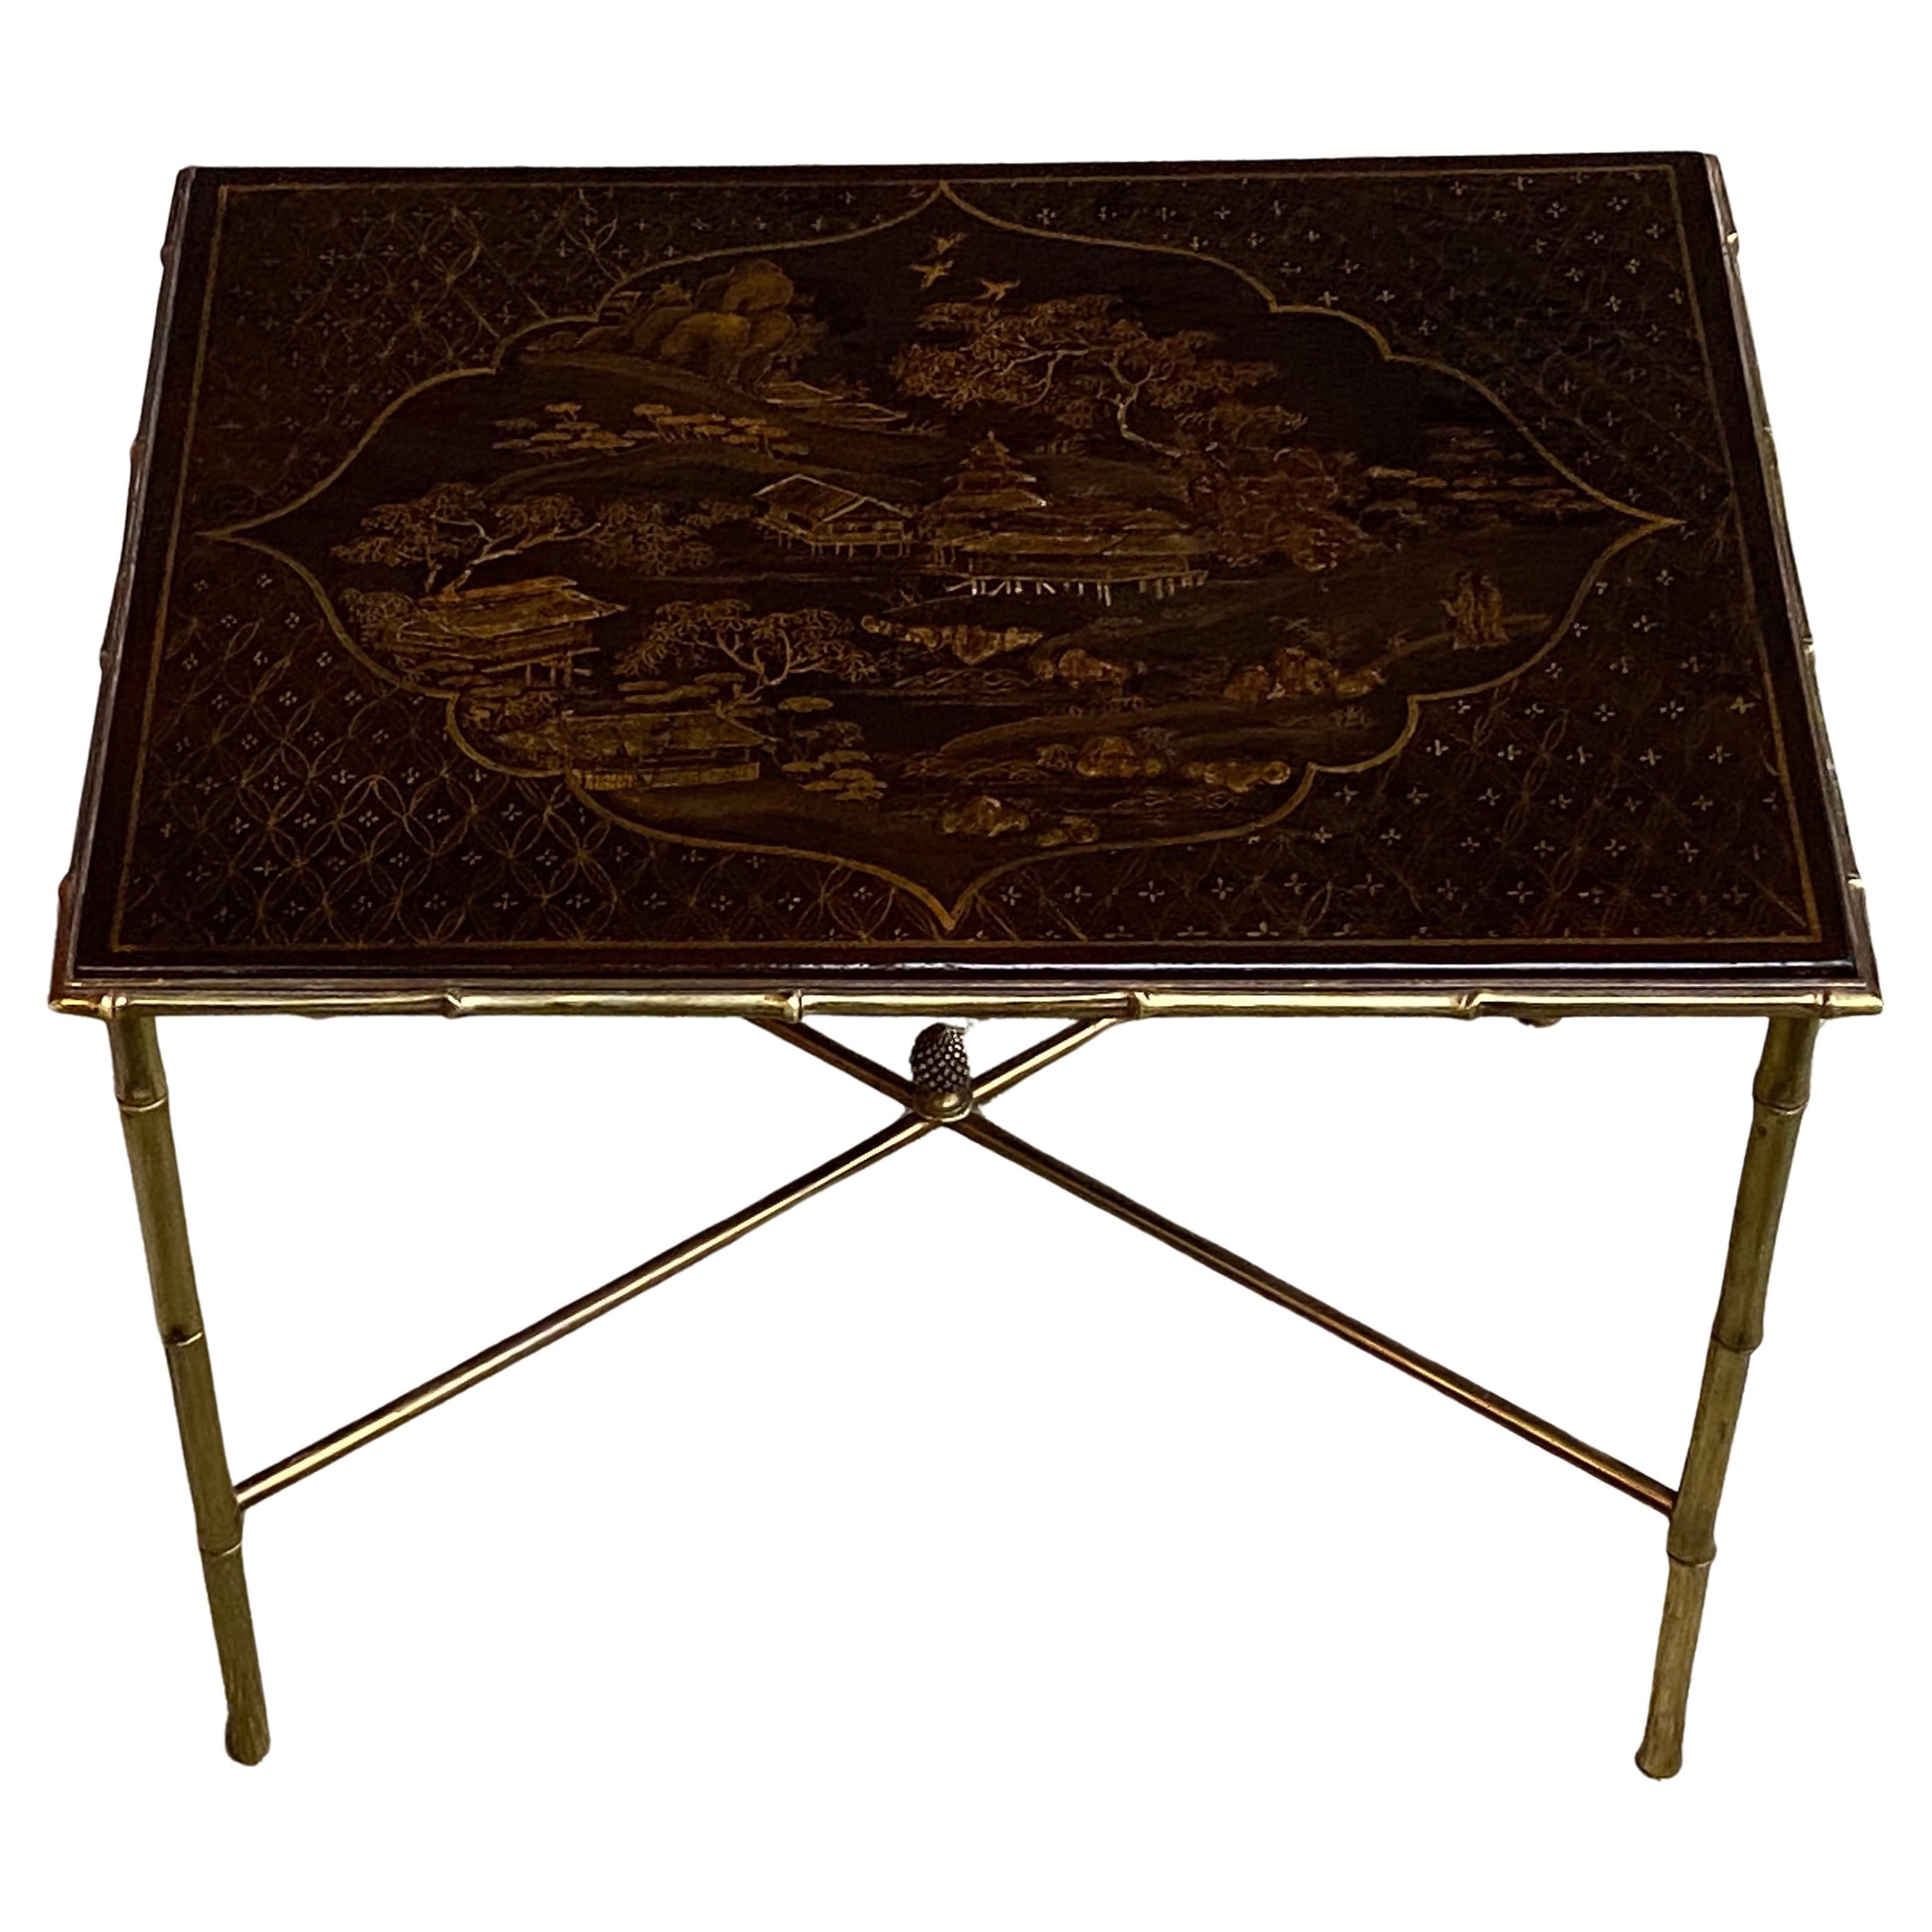 1950 ′ Maison Baguès or Jansen Table Bamboo Decor in Gilt Bronze with China Lacq